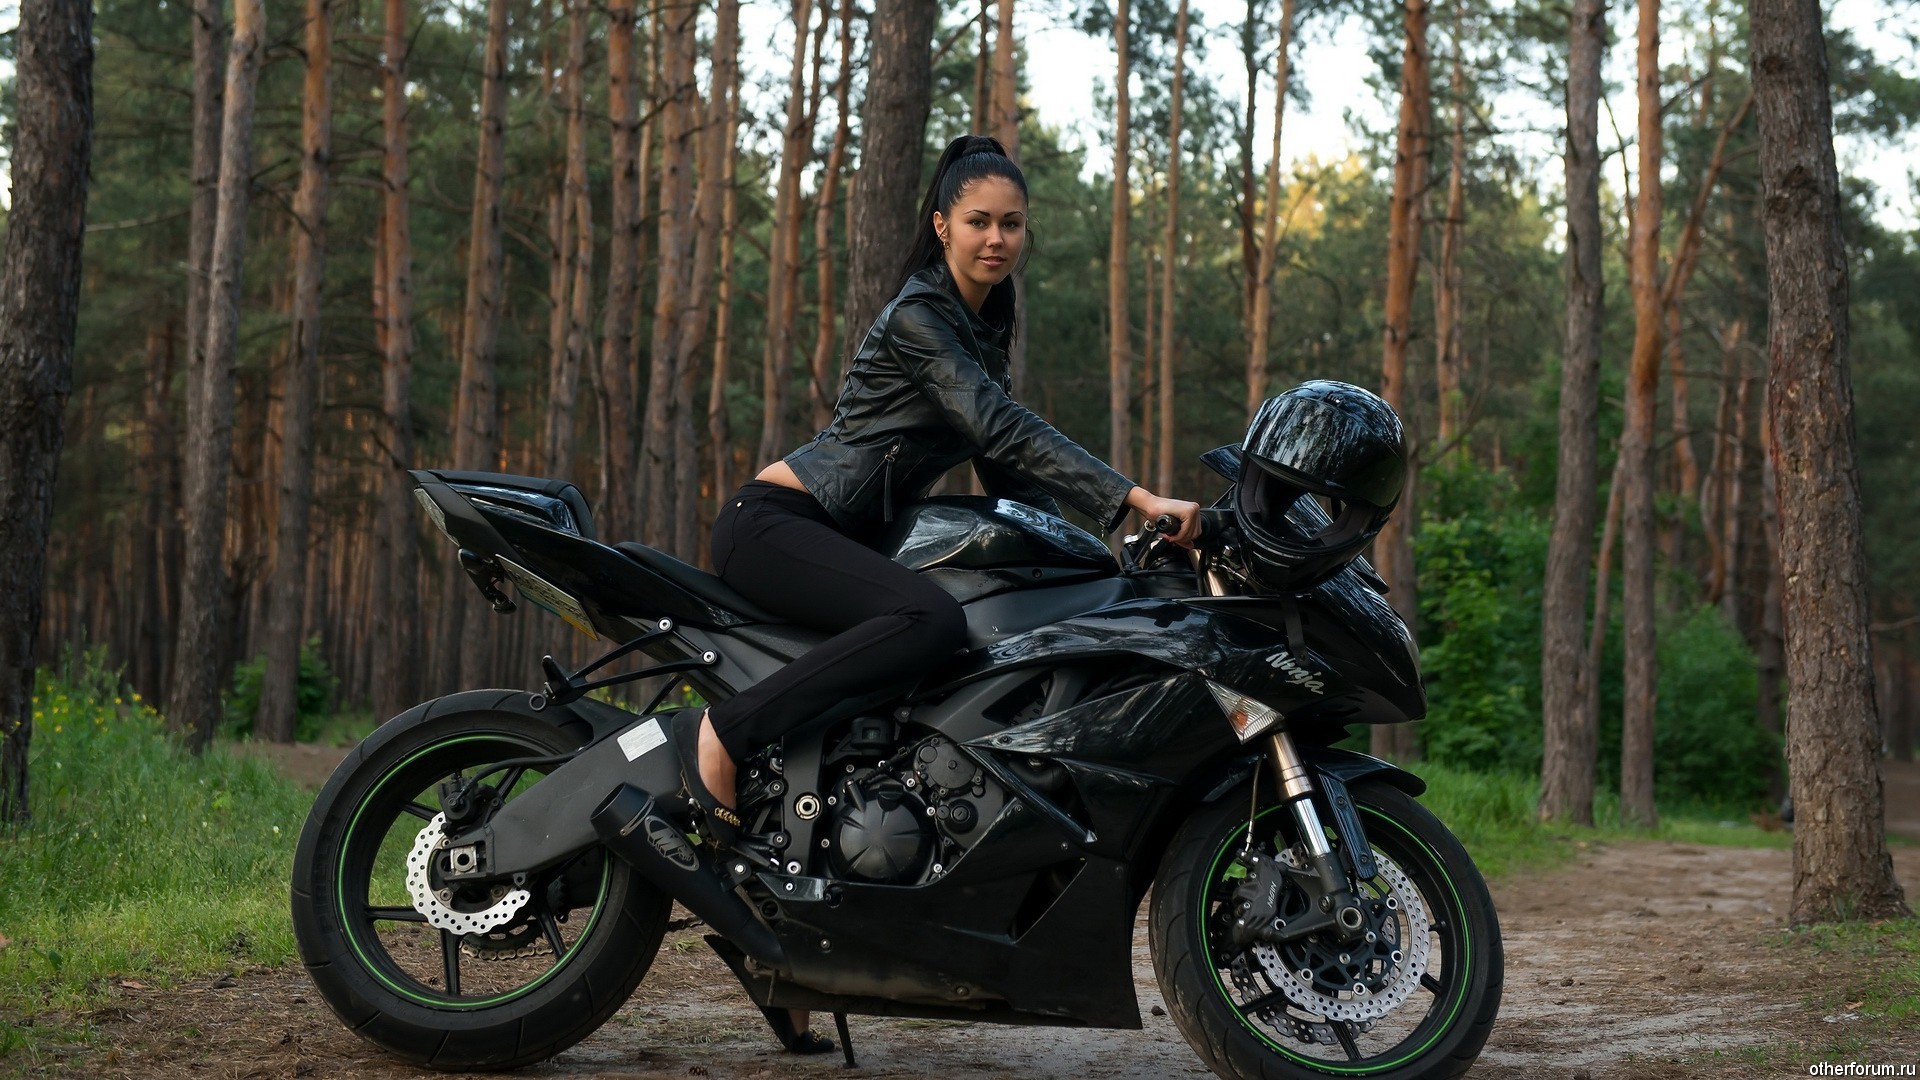 Women and Motorcycles Wallpaper. Motocycles Motorcycles and girls Women Kawasaki Ninja motorcycle